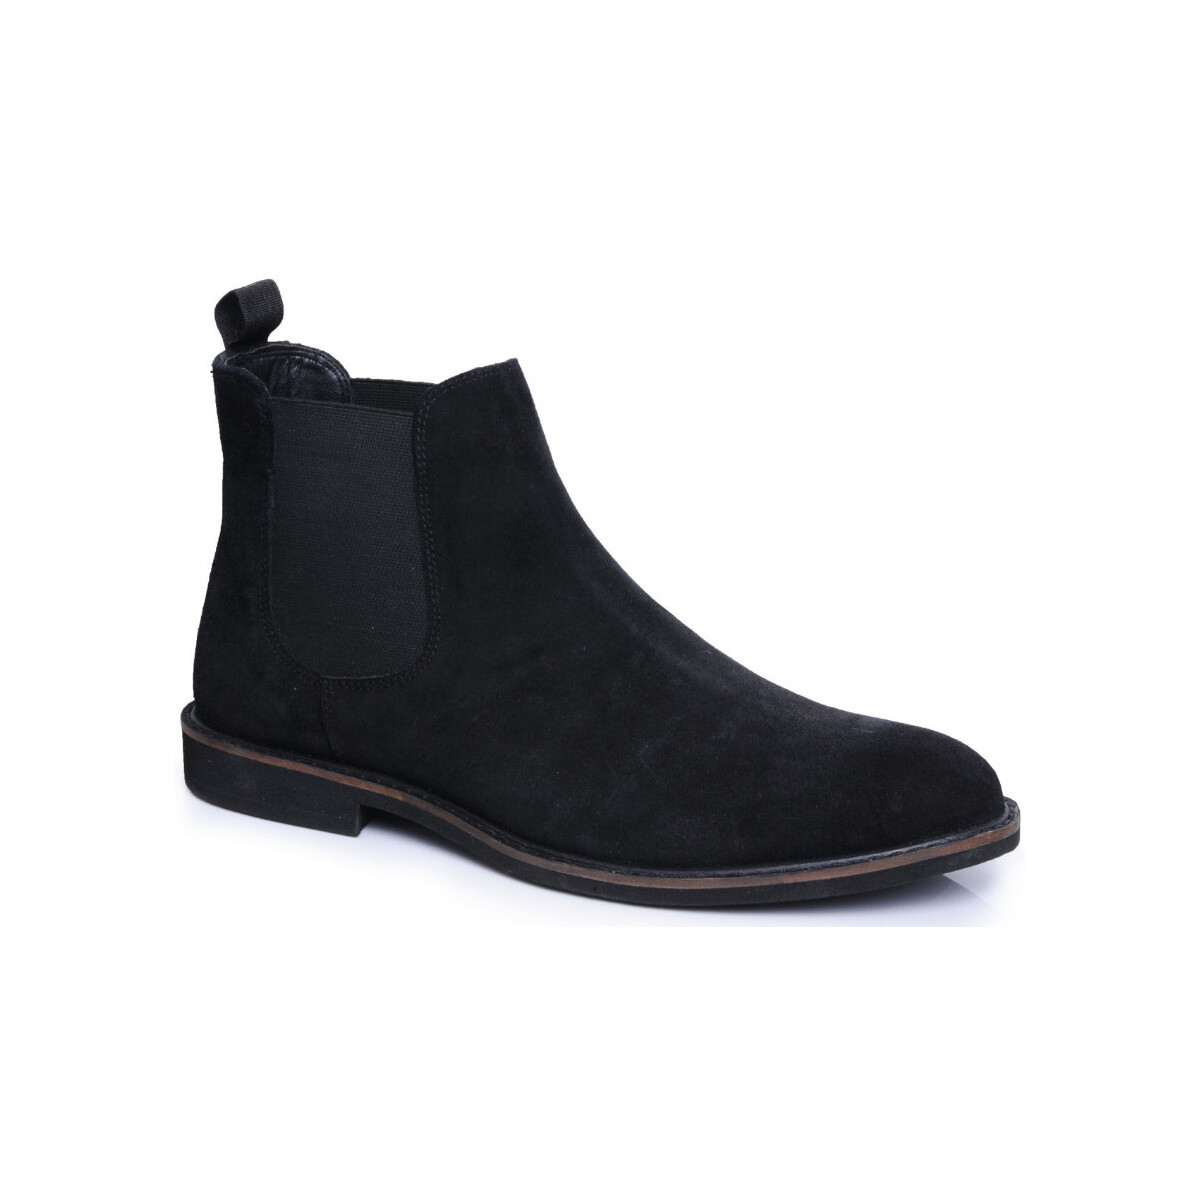 Chaussures Homme Boots Silver Street London San Diego Noir